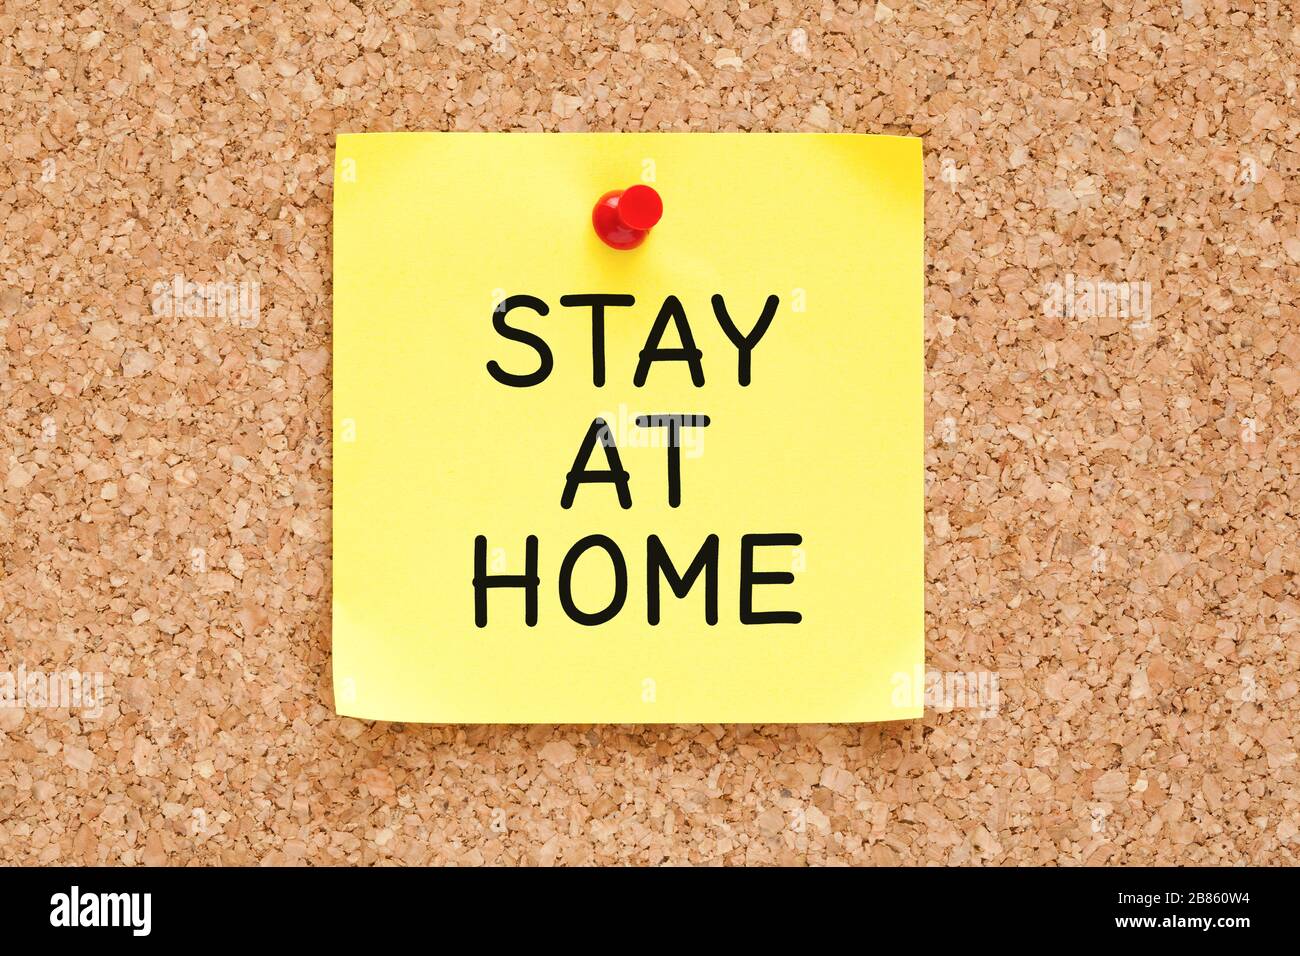 Text Stay at Home handwritten on yellow sticky note pinned on cork bulletin board. Social Distancing and Self-isolation concept. Stock Photo